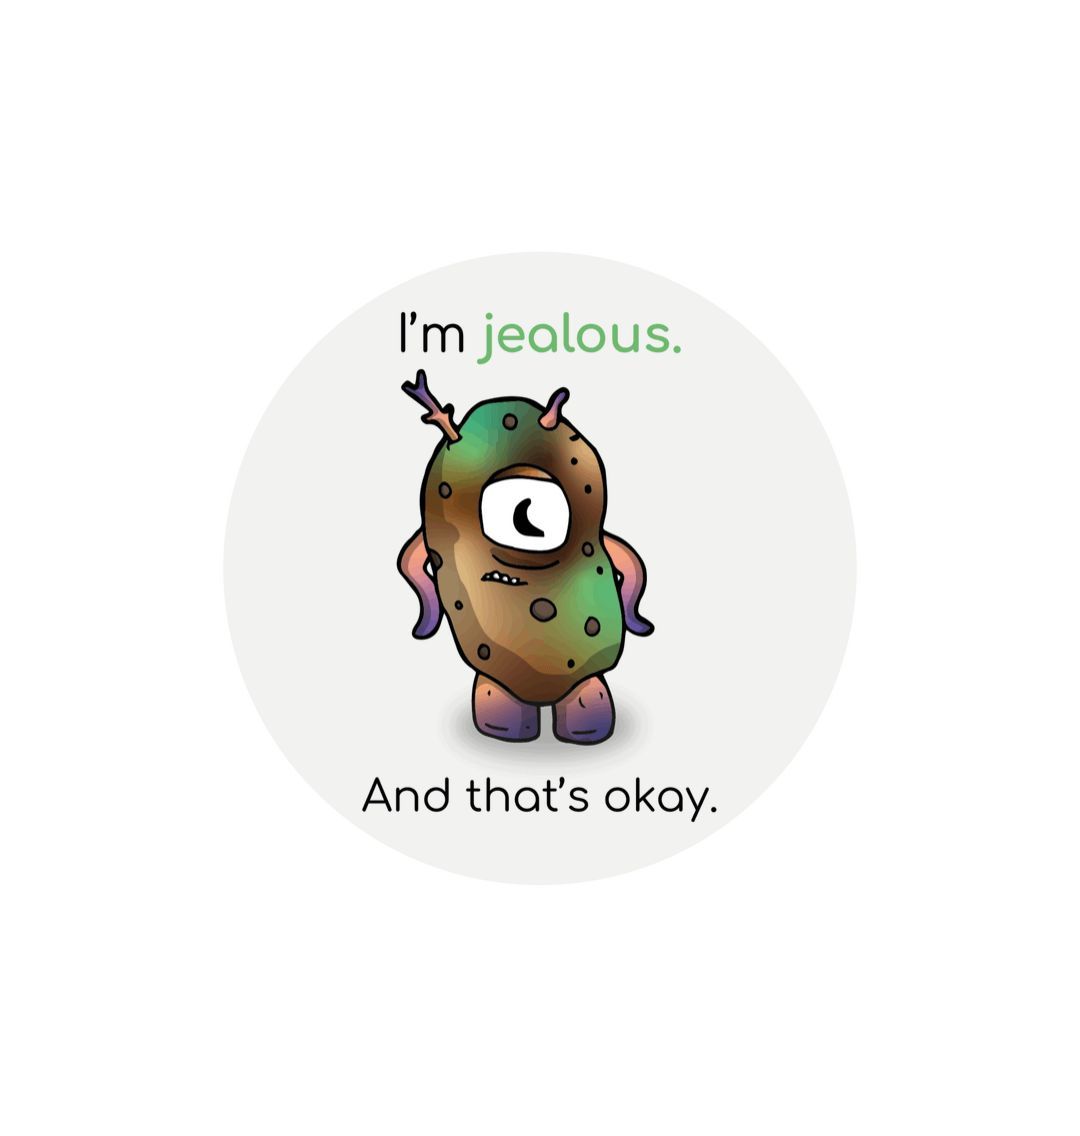 White \"I'm jealous. And that's okay!\" Round Children's Emotions Sticker 60mm x 60mm